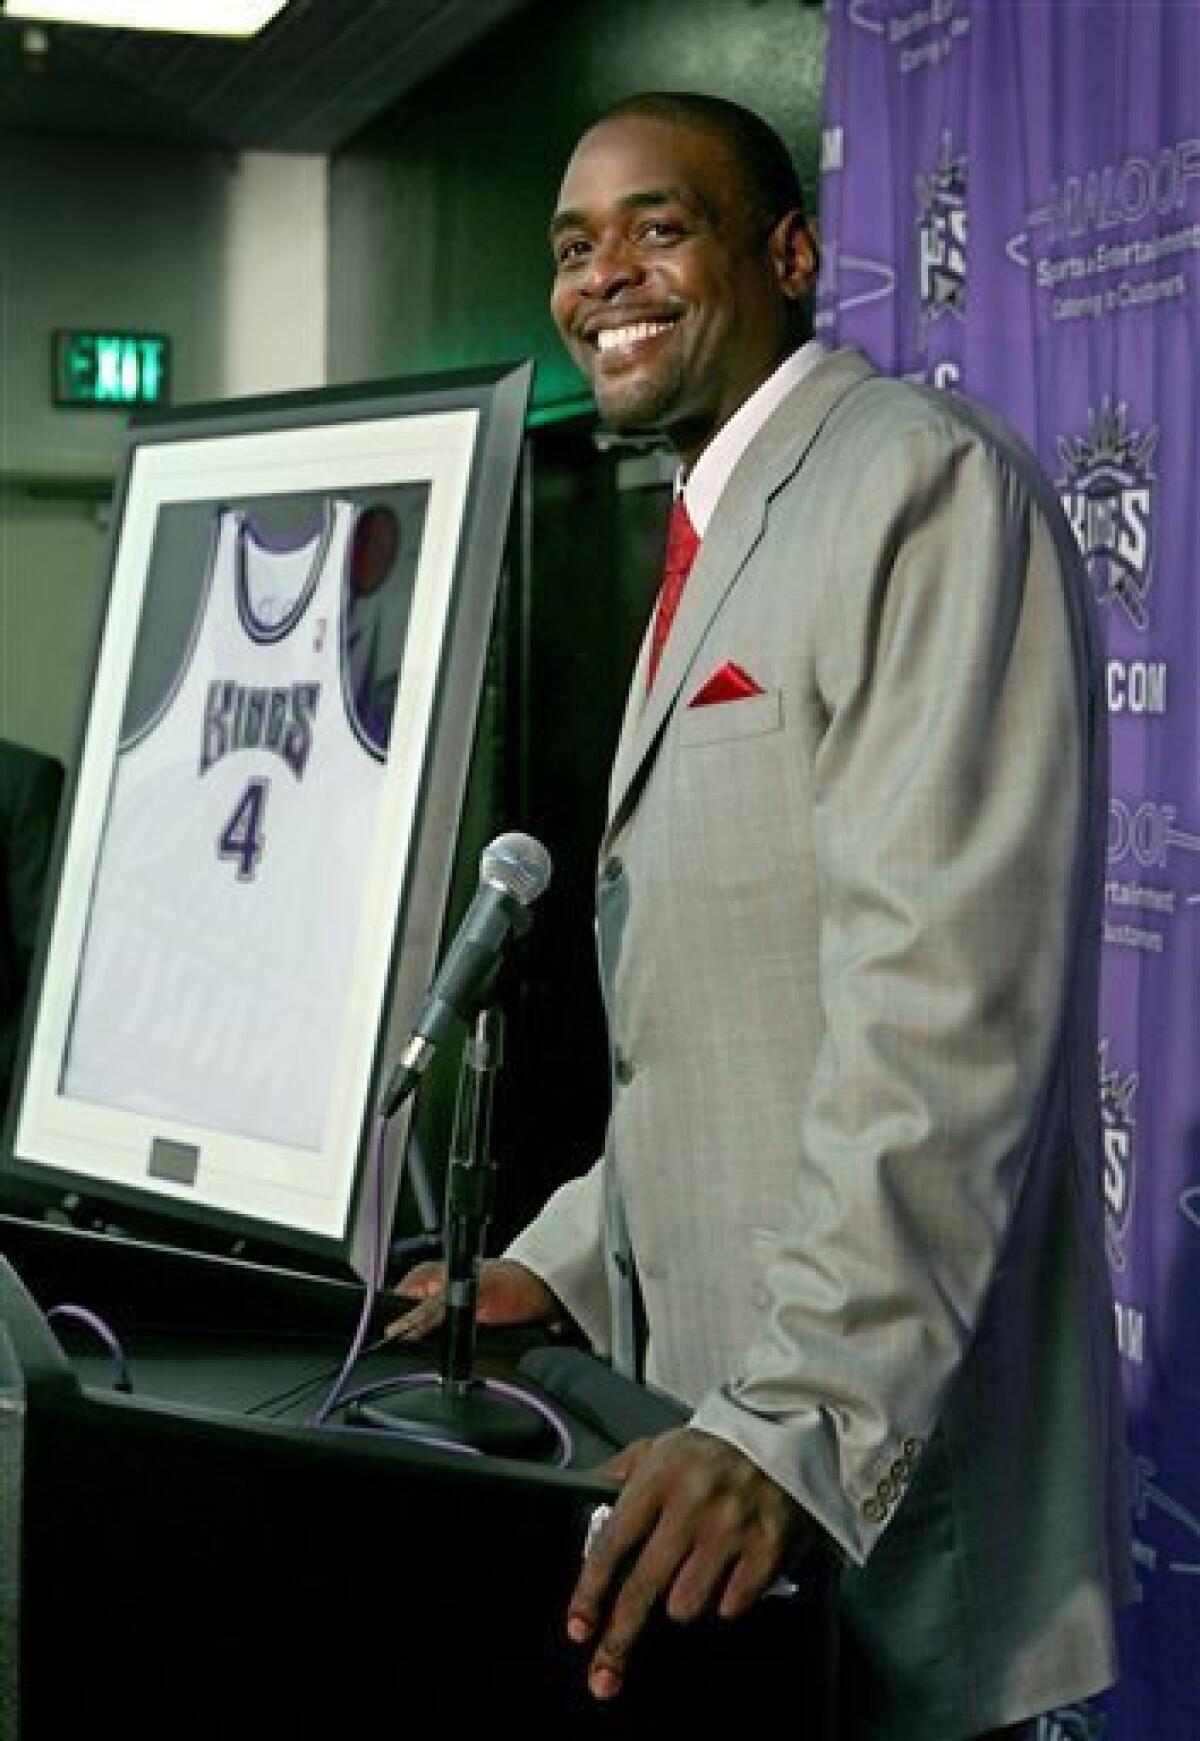 The Kings' retired Chris Webber jersey is so dirty 